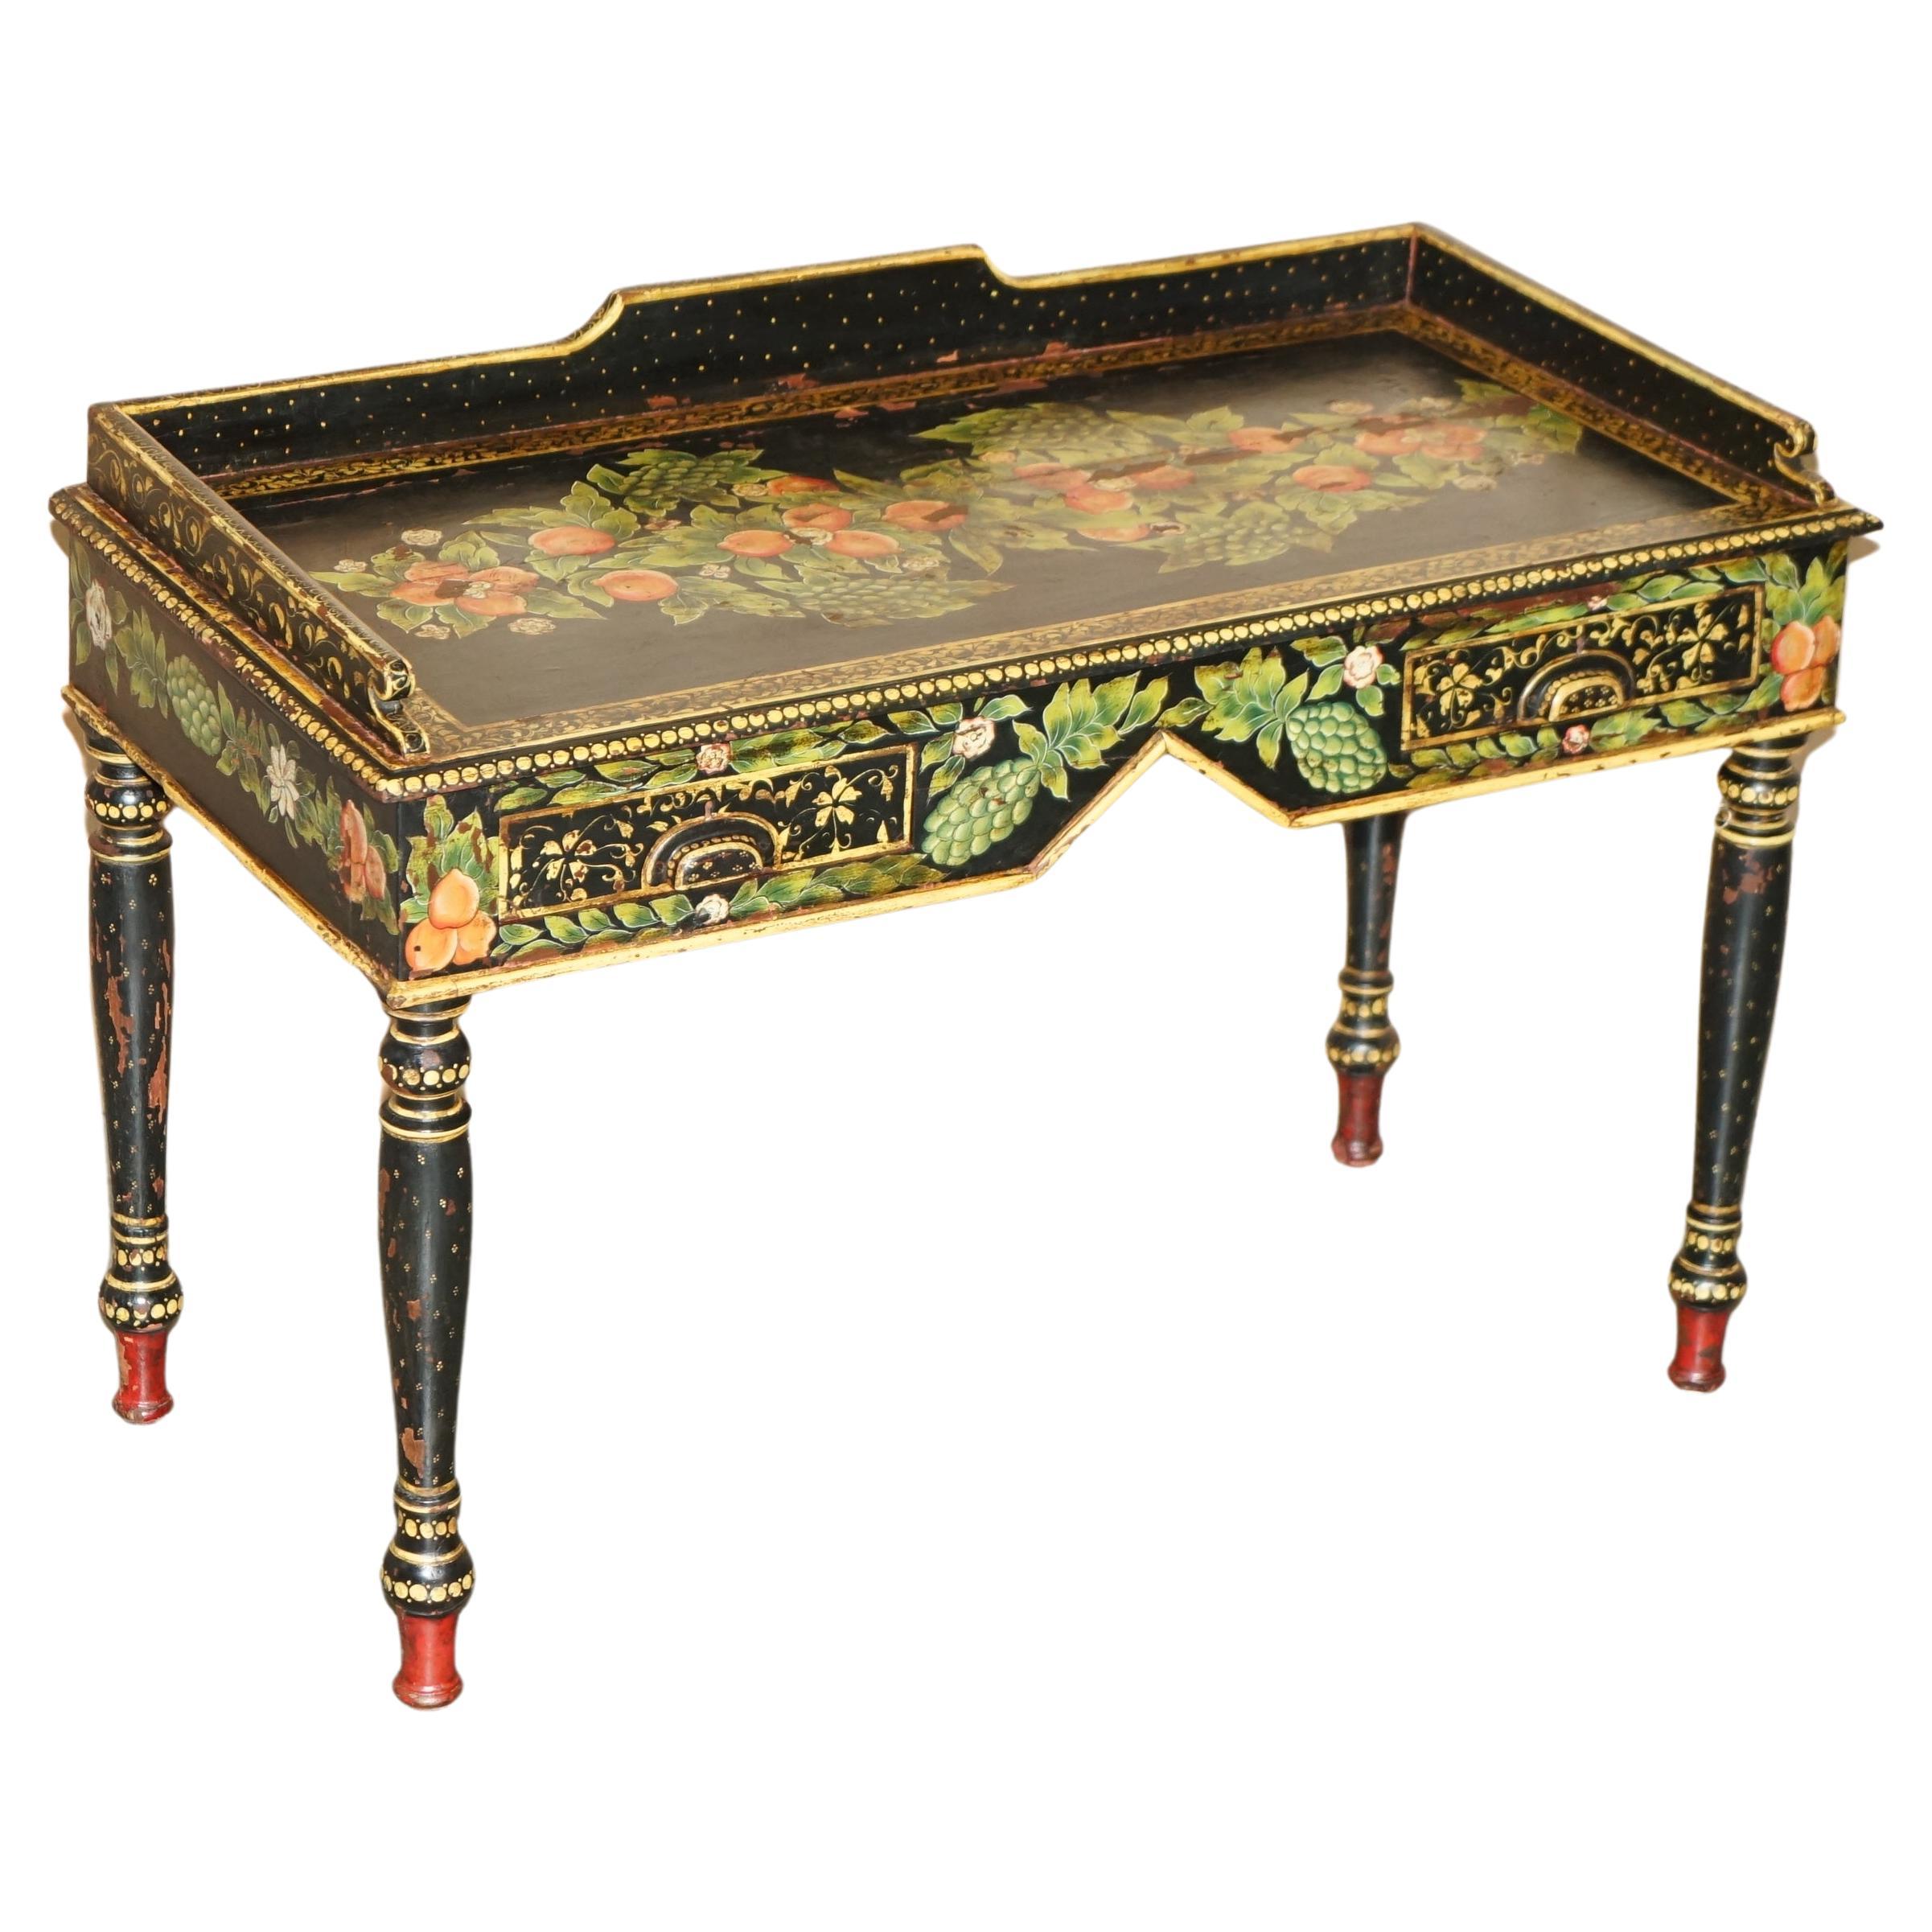 Royal House Antiques

Royal House Antiques is delighted to offer for sale this lovely hand painted circa 1880 Swedish writing table, desk or dressing table with gallery back and two large drawers

Please note the delivery fee listed is just a guide,